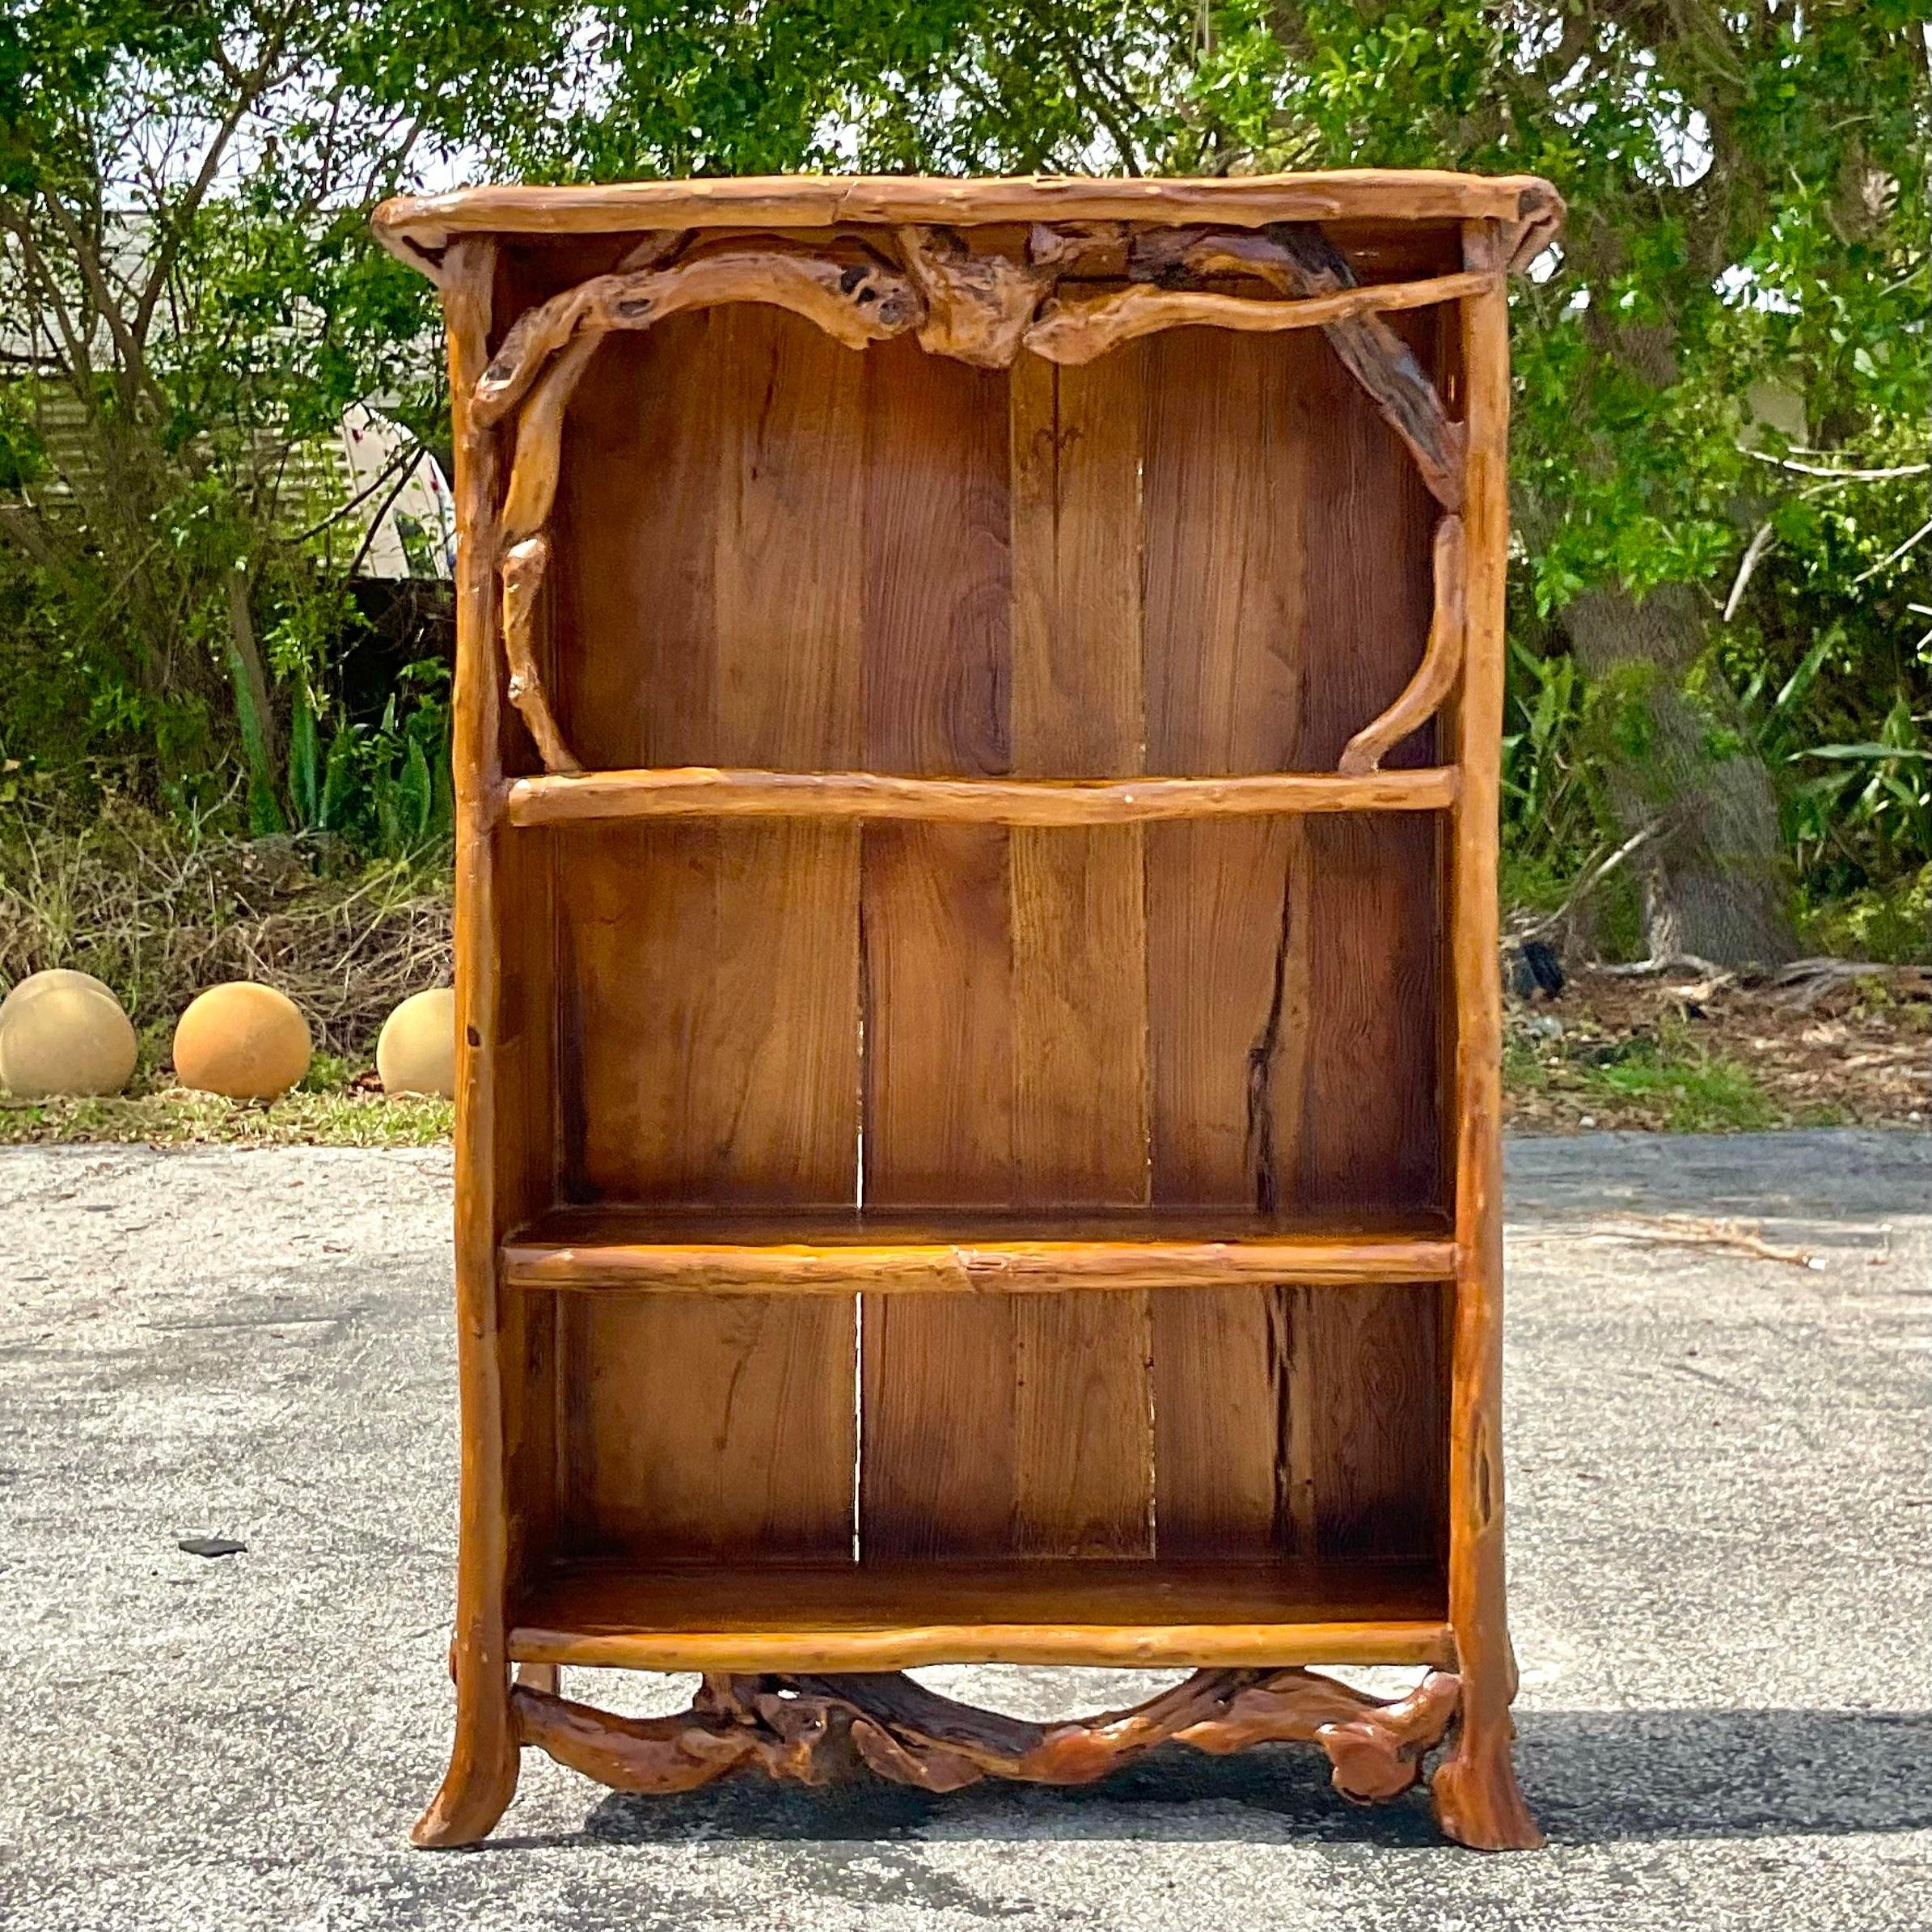 Rustic Revival: Elevate your décor with this Vintage Boho Primitive Branch Etagere. Crafted with natural charm and American character, it's the perfect blend of functionality and whimsical style for any space.